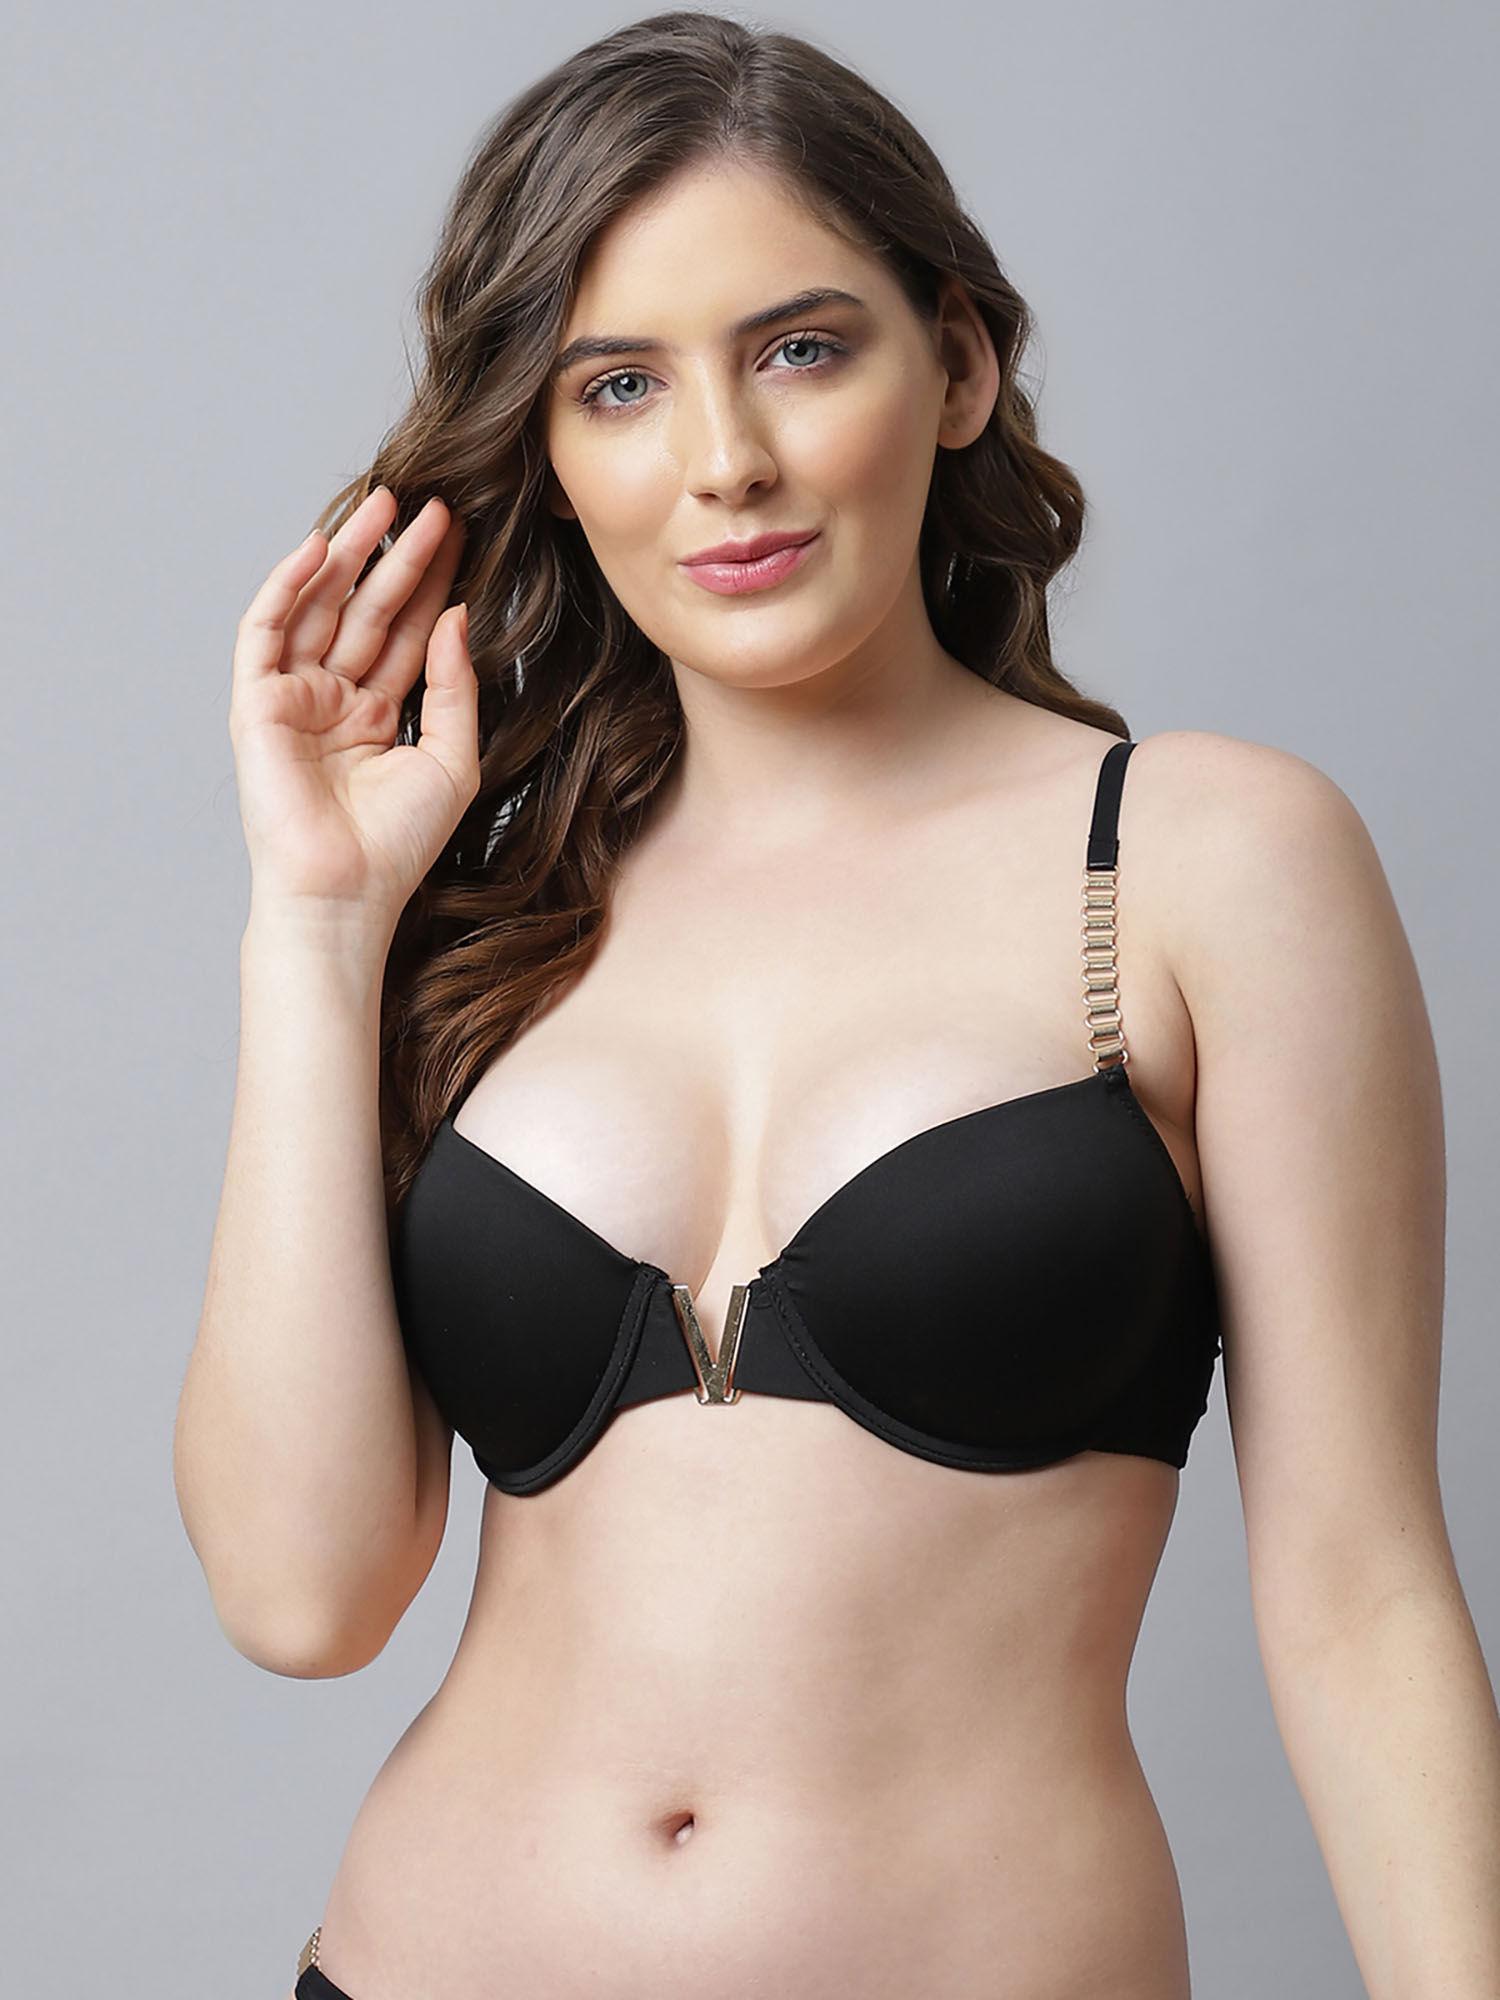 beautiful chain strap plunge bra for young women - black